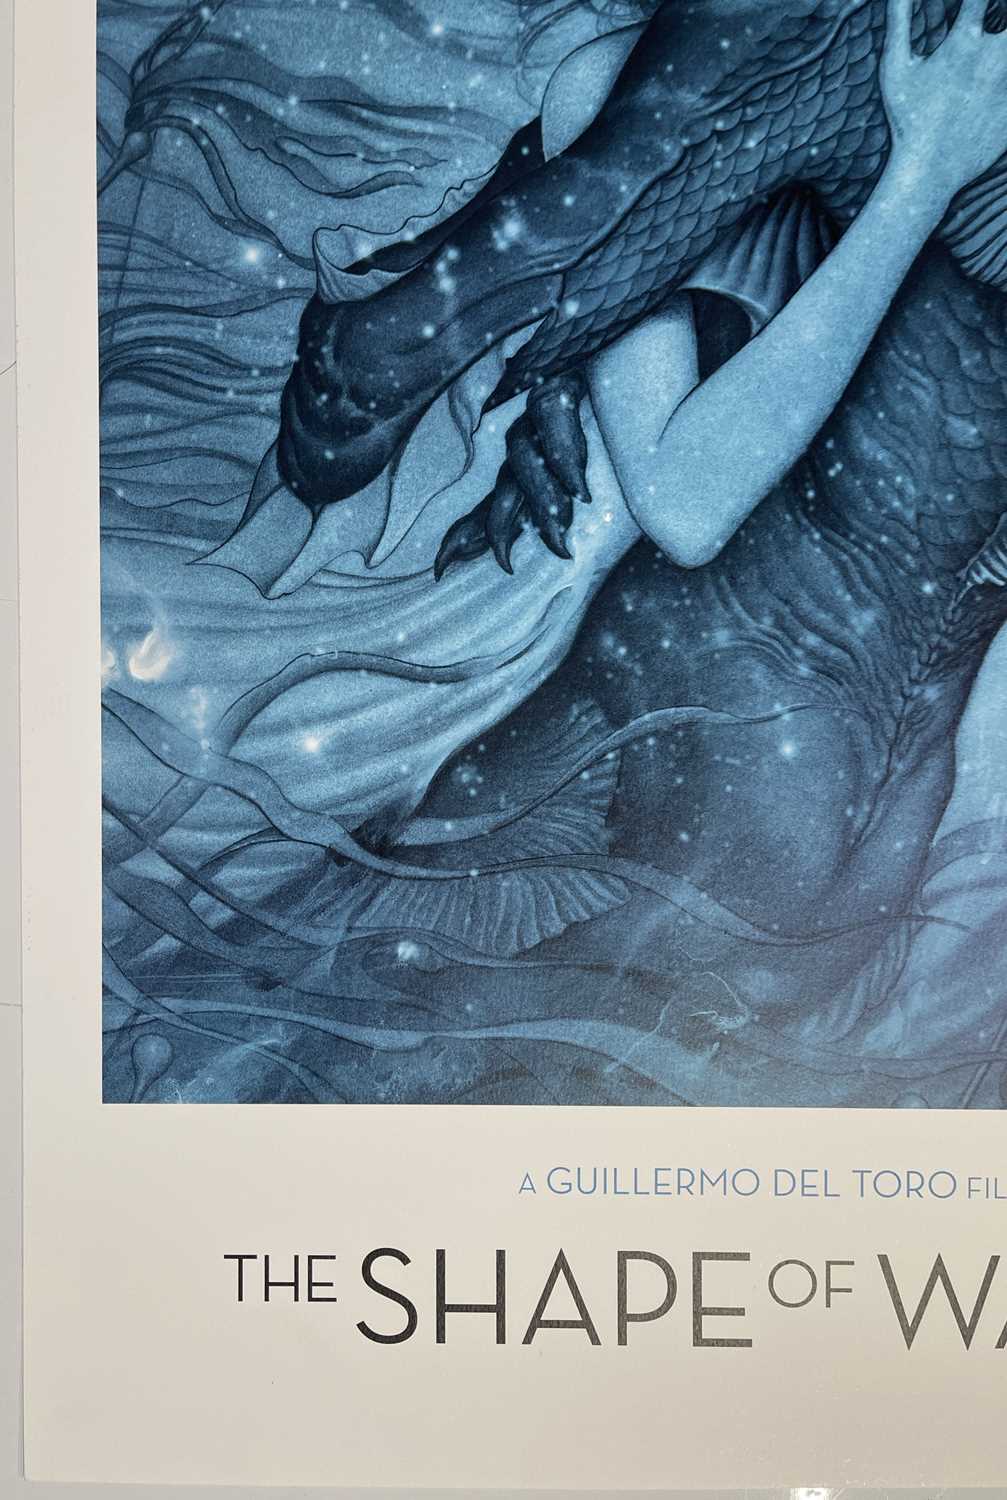 GUILLERMO DEL TORO - SHAPE OF WATER (2017) - LIMITED EDITION VENICE FILM FESTIVAL ONLY POSTER. - Image 4 of 6